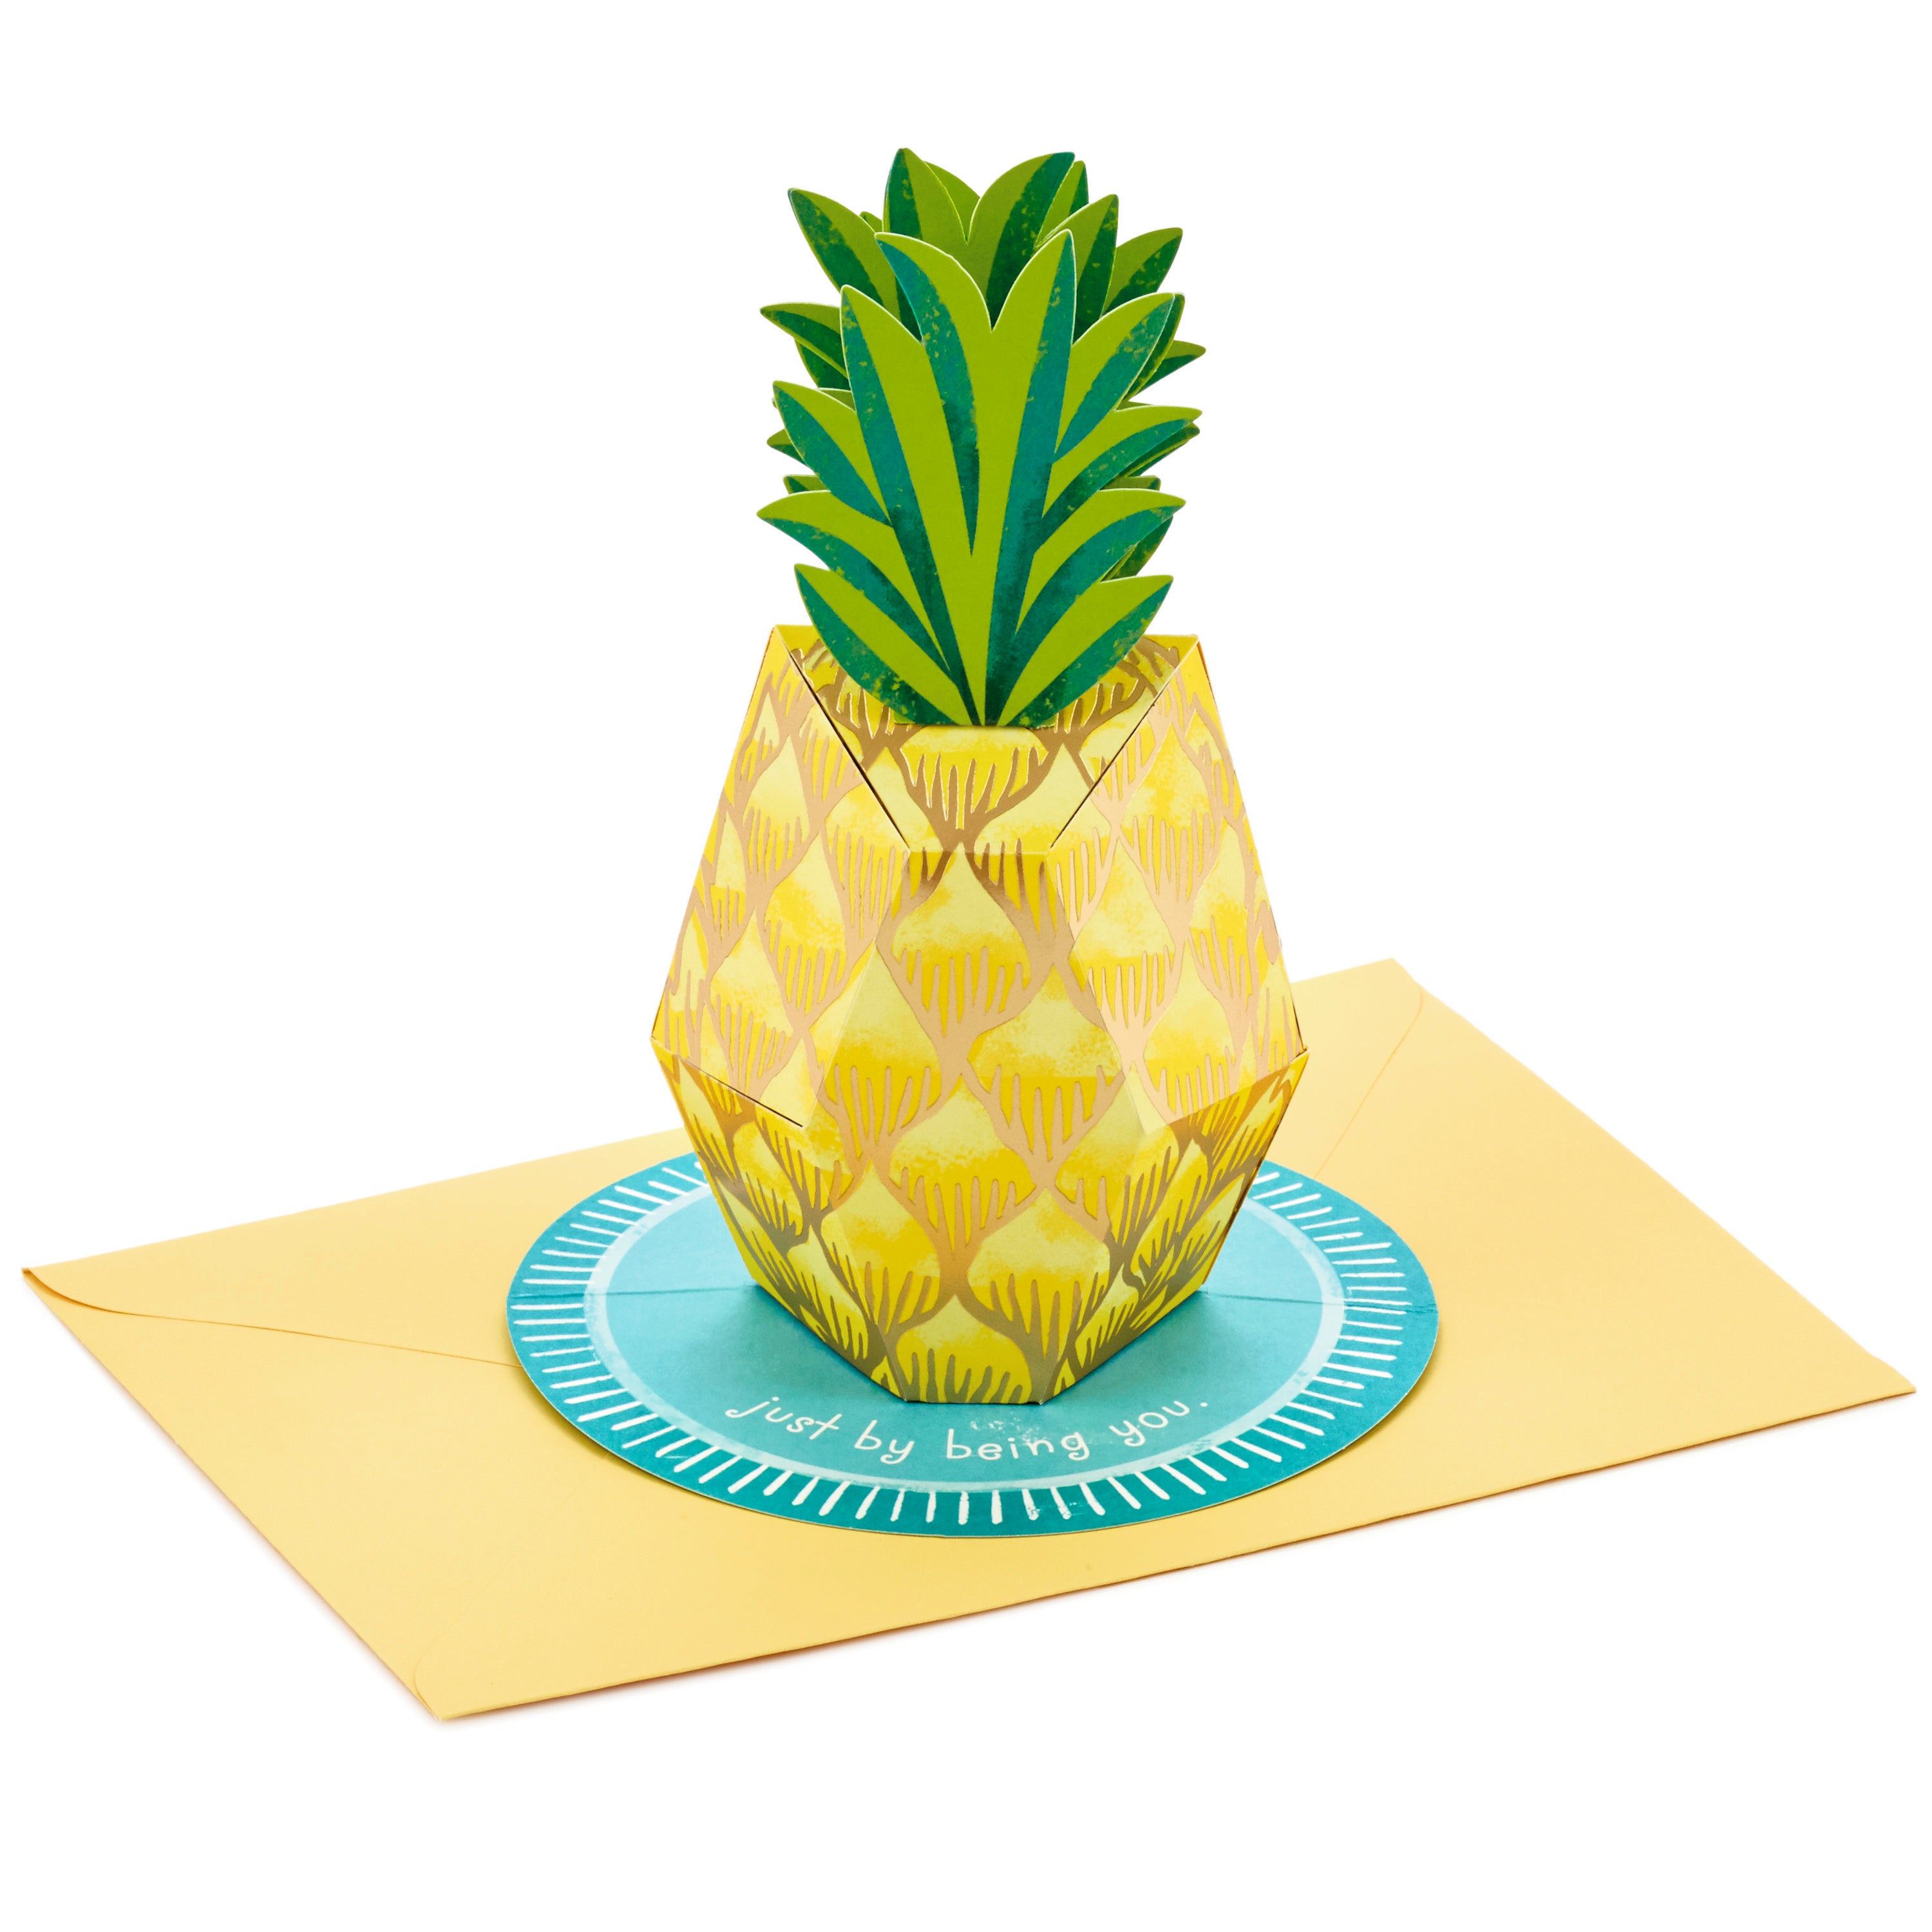 Hallmark Paper Wonder Pop Up Birthday Card, Thank You Card, Encouragement Card, All Occasion Card (Pineapple)